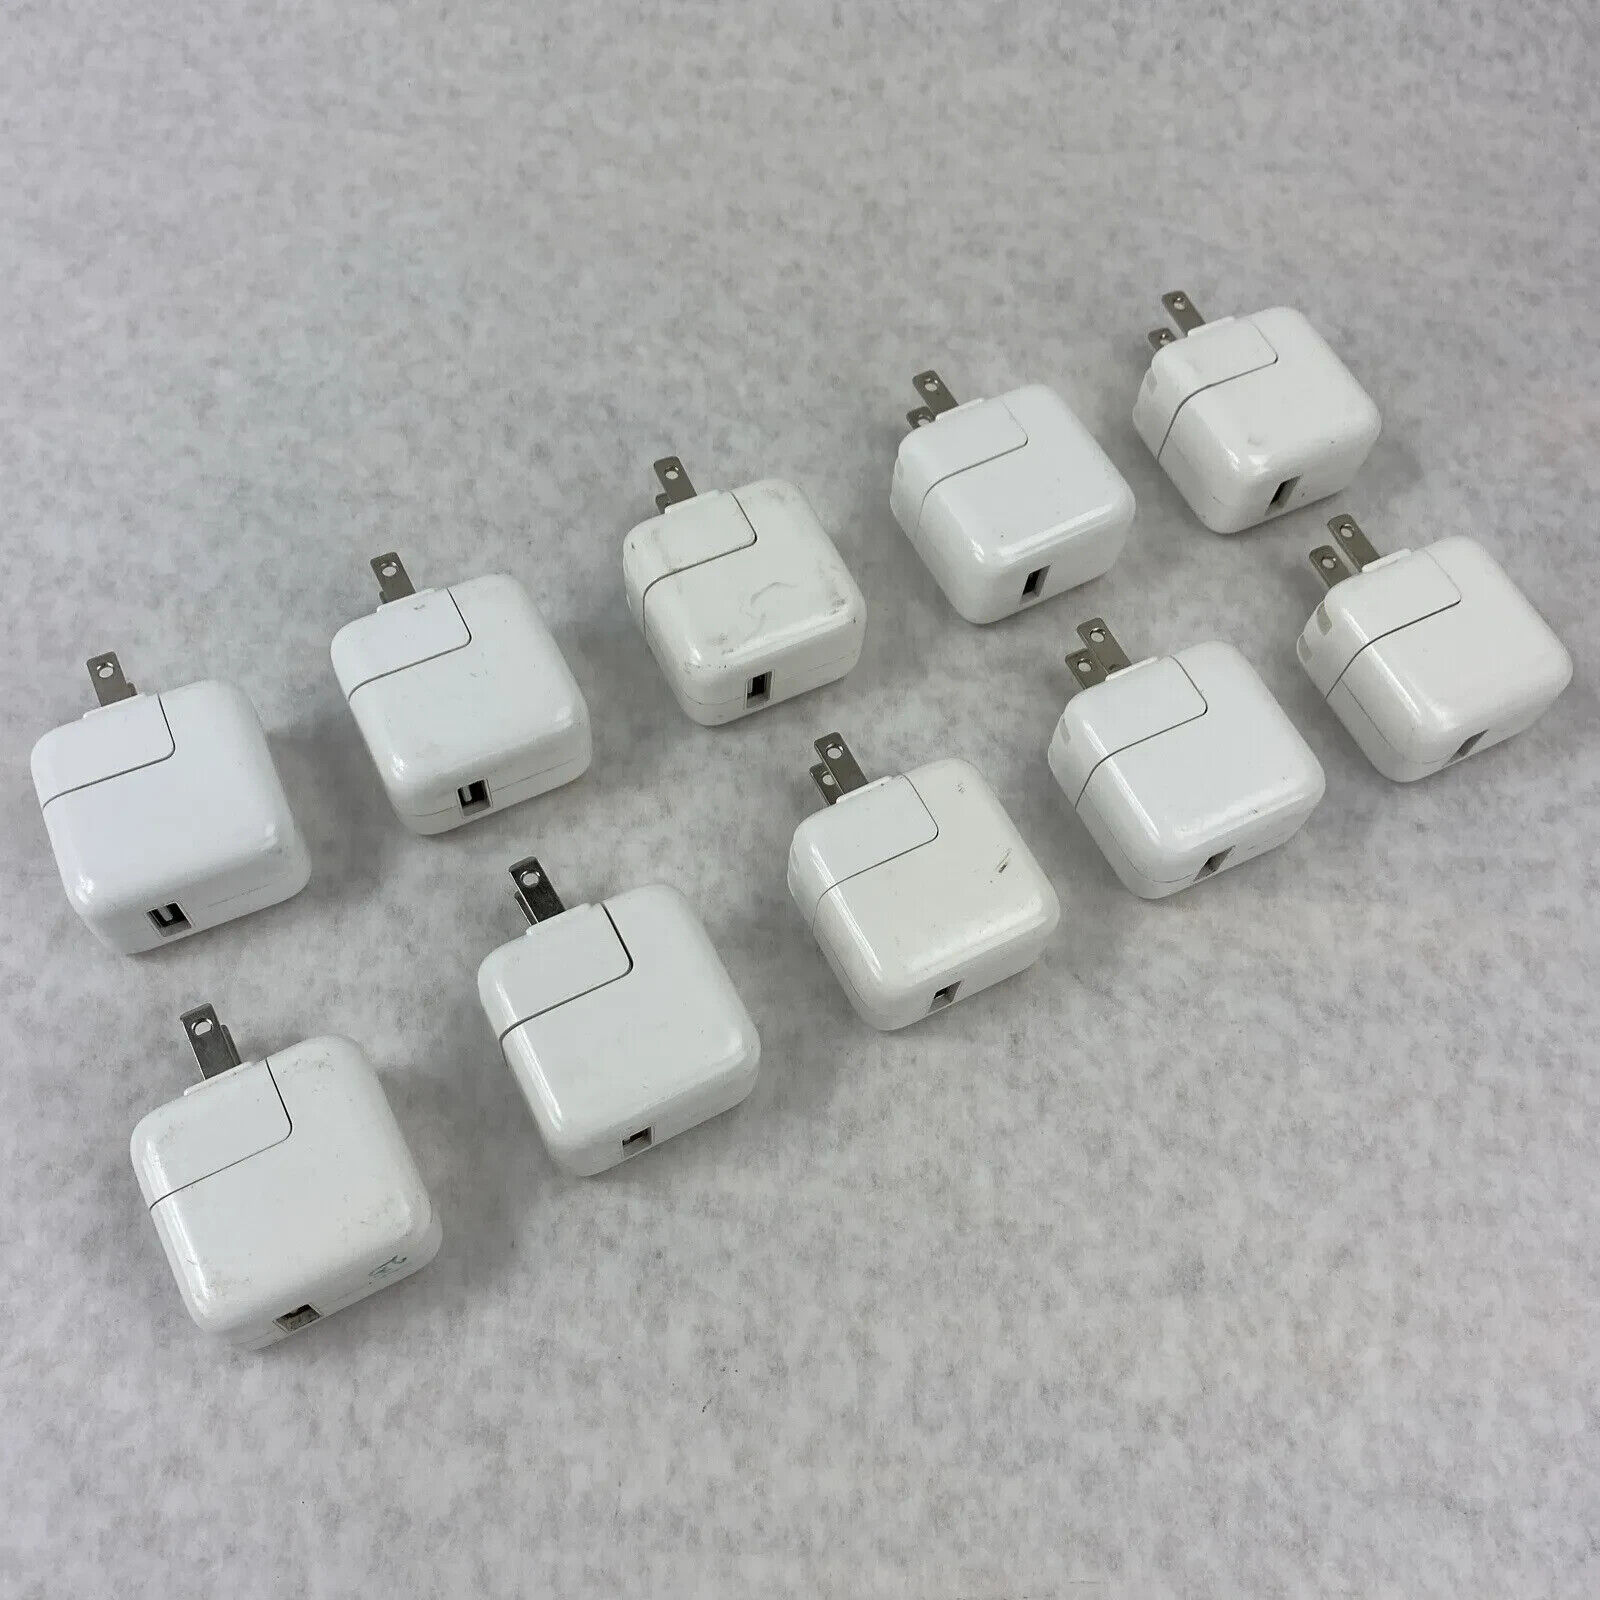 Lot of 10 OEM Apple USB Power AdapterS for iPhone & iPad W/ FREEE FAST SHIPPING